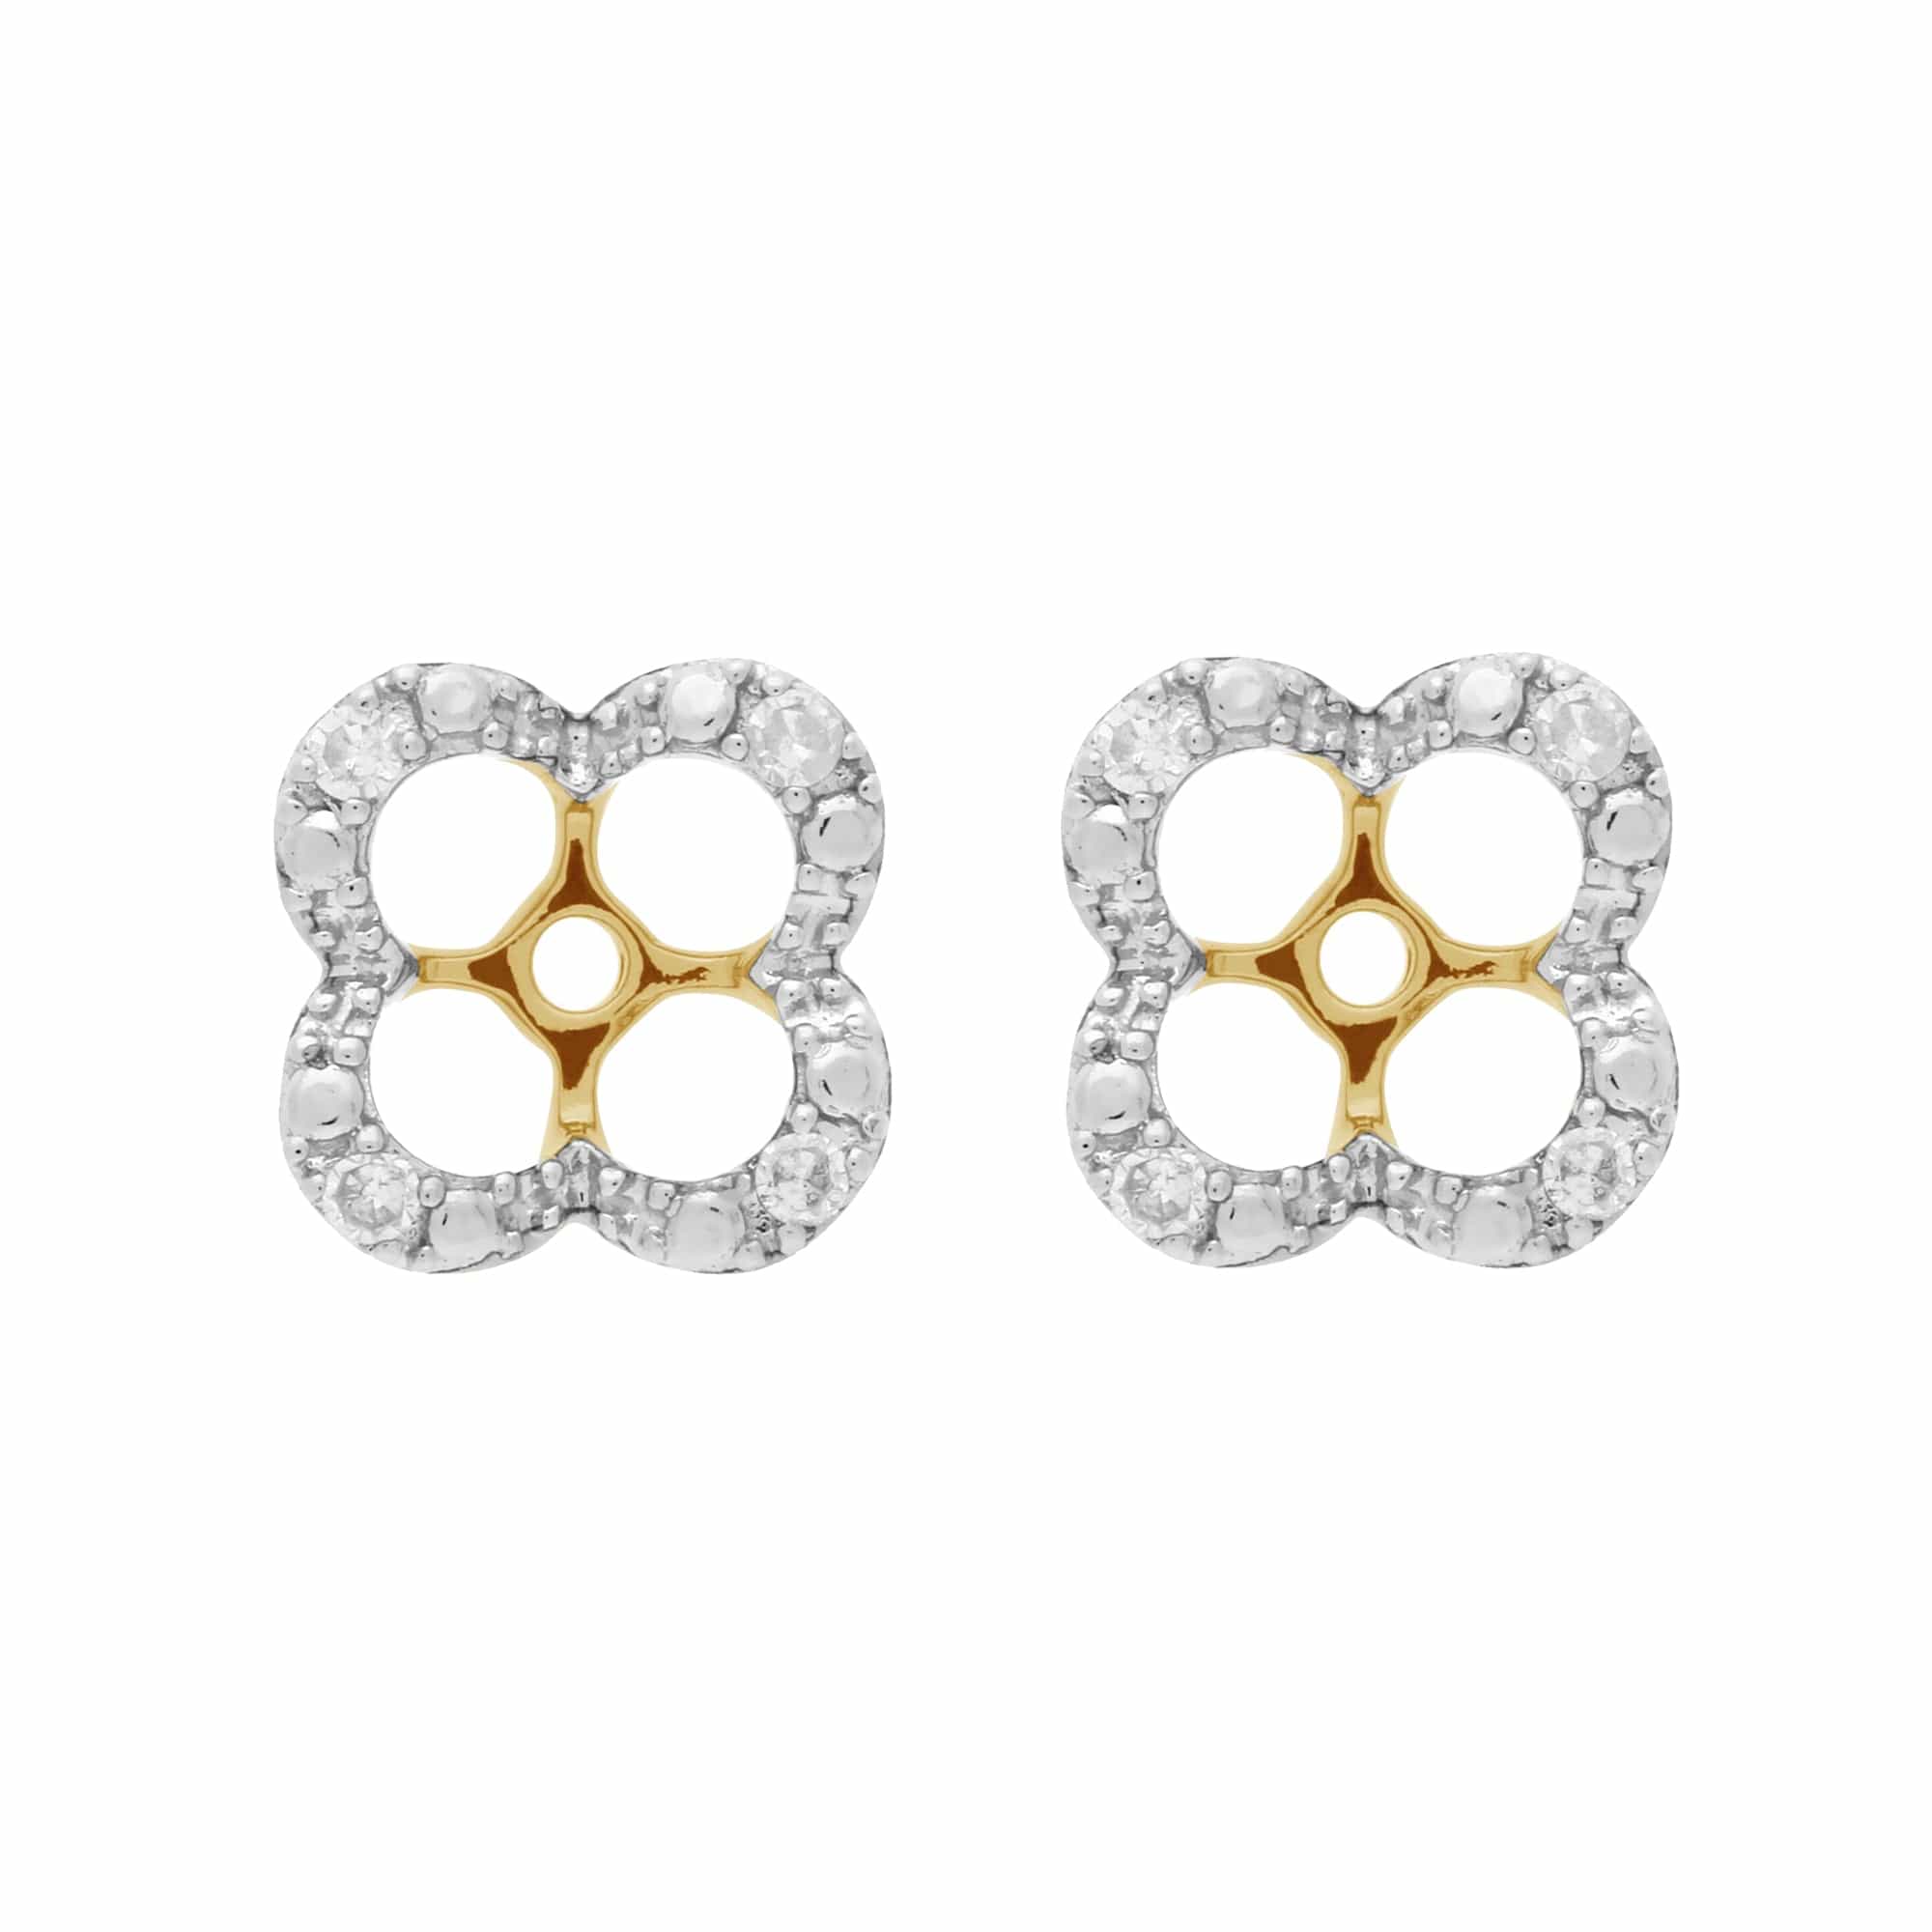 Classic Round Blue Topaz Stud Earrings with Detachable Diamond Floral Ear Jacket in 9ct Yellow Gold - Gemondo